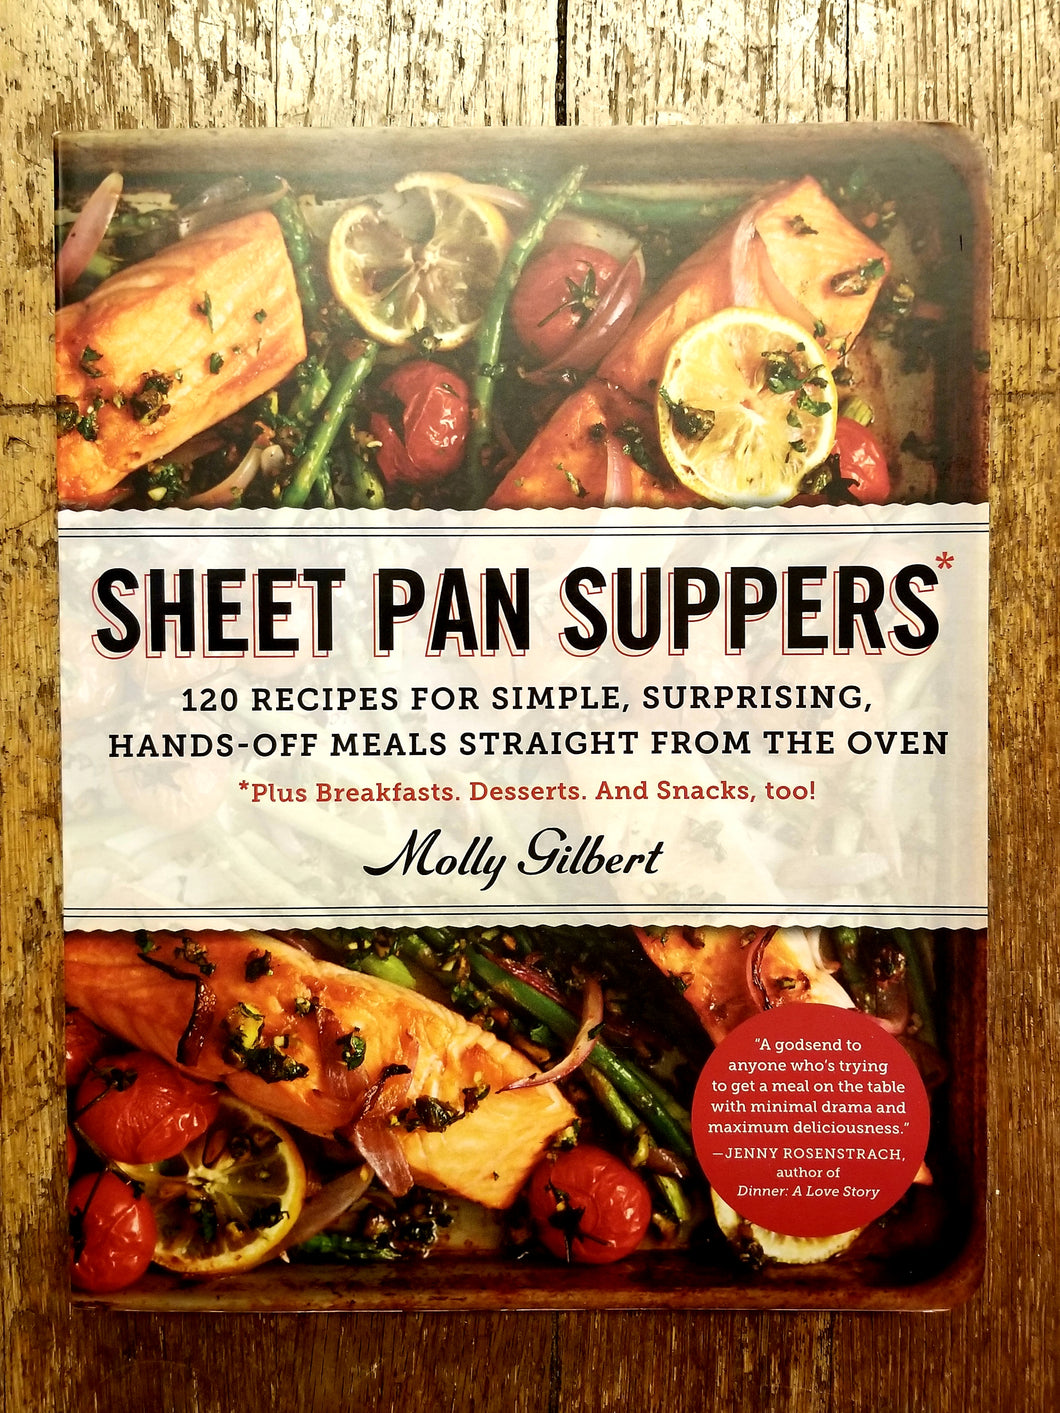 Sheet Pan Suppers by Molly Gilbert